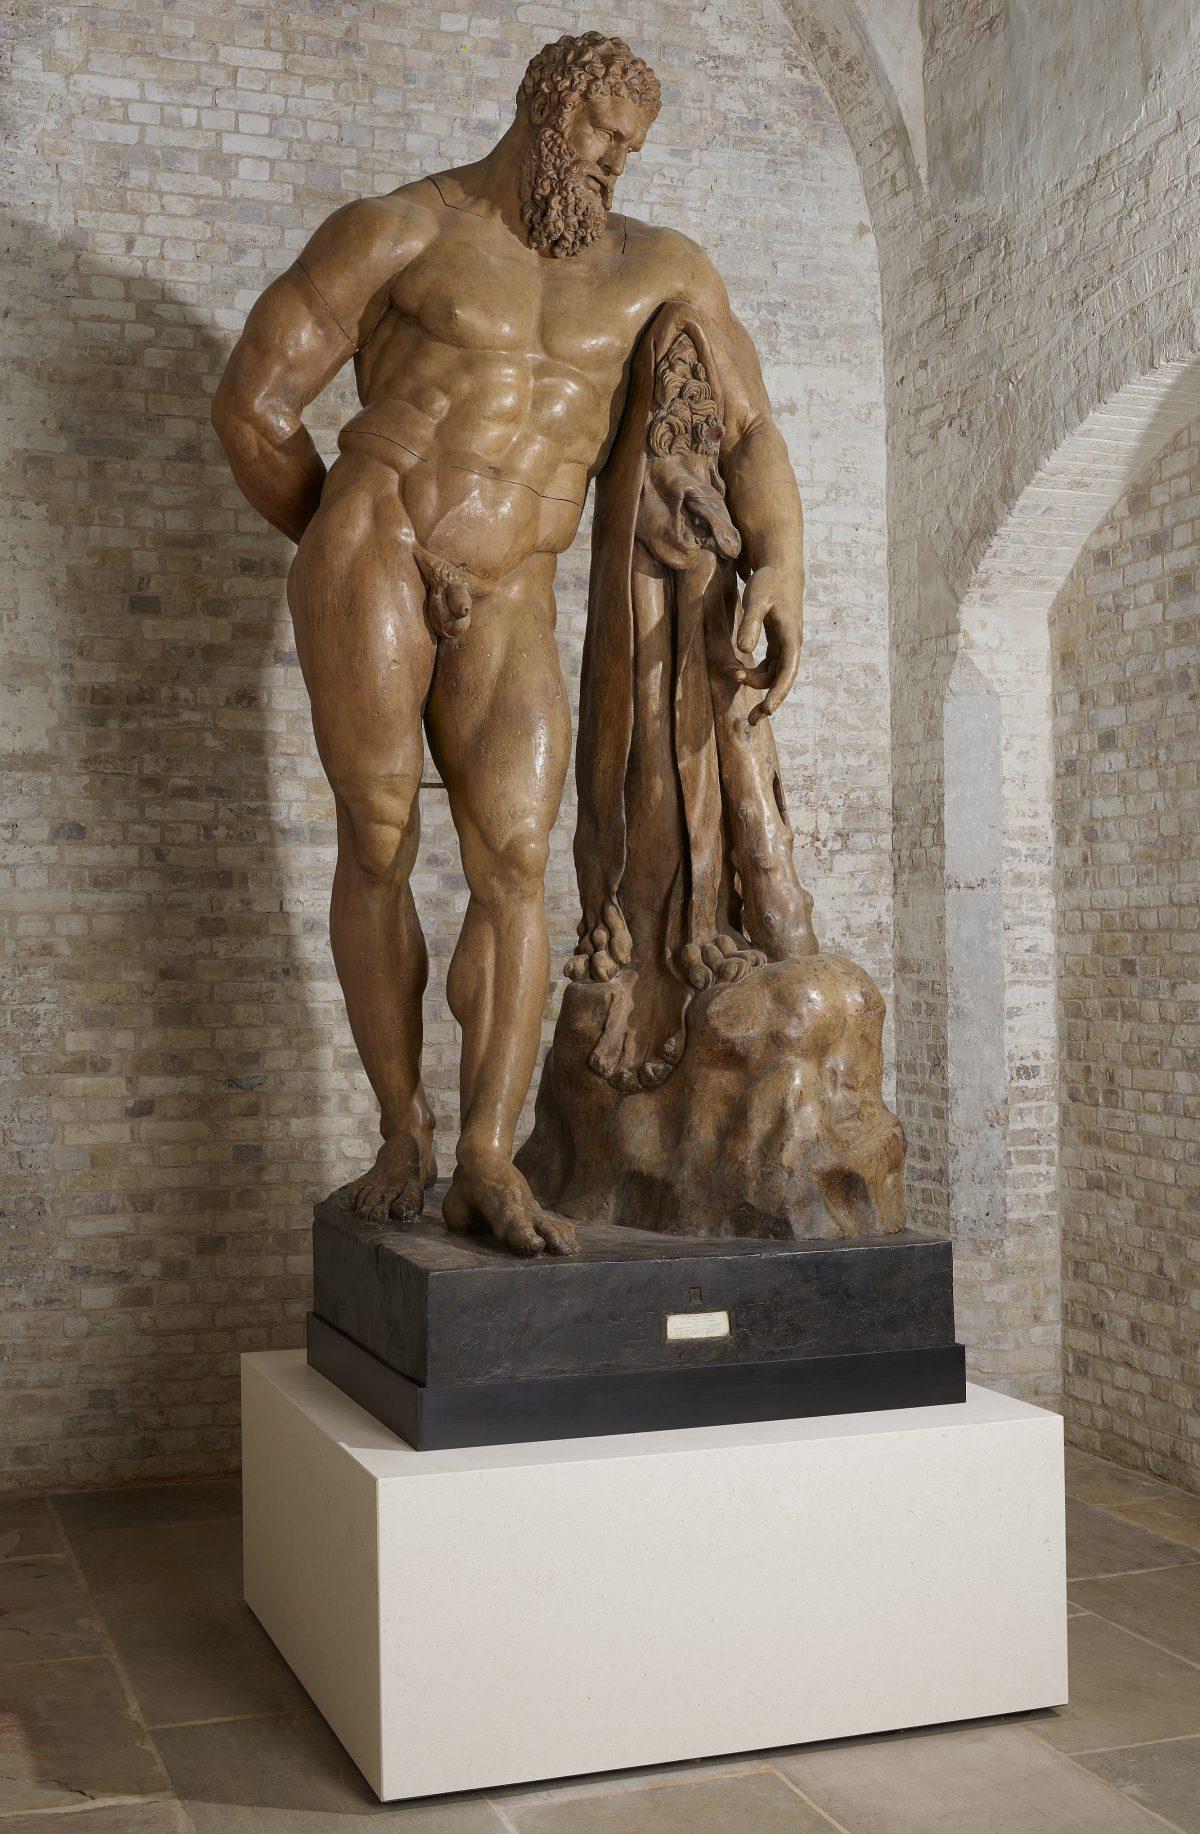 The colossal 10-foot-5-inch-high "Farnese Hercules" plaster cast at the Royal Academy of Arts in London. (Royal Academy of Arts, London)